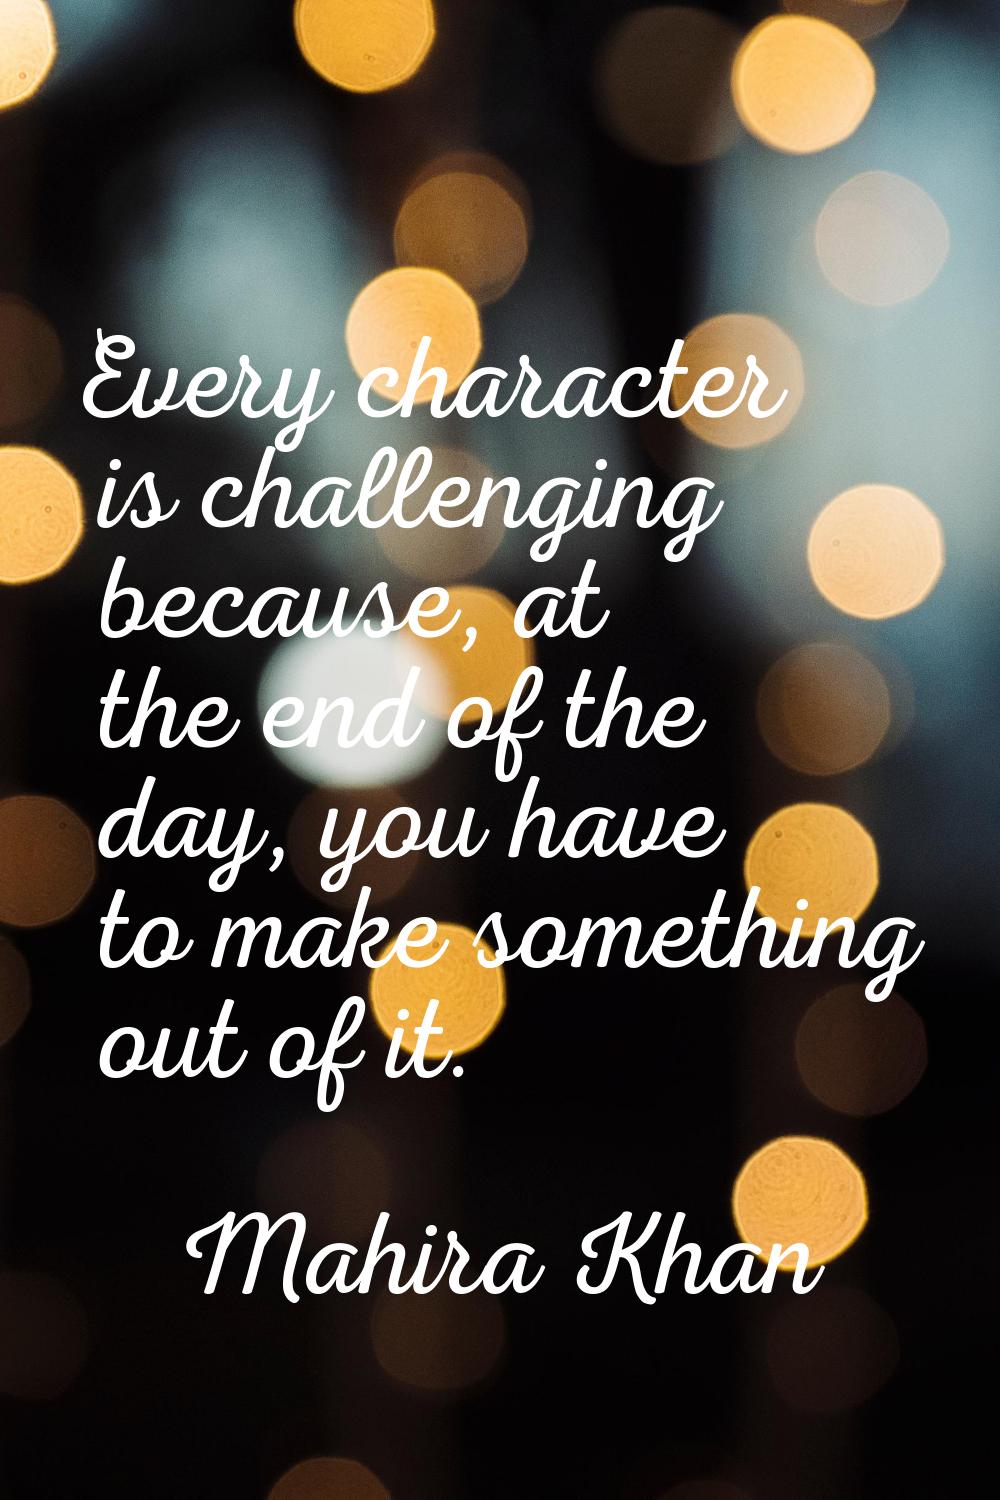 Every character is challenging because, at the end of the day, you have to make something out of it